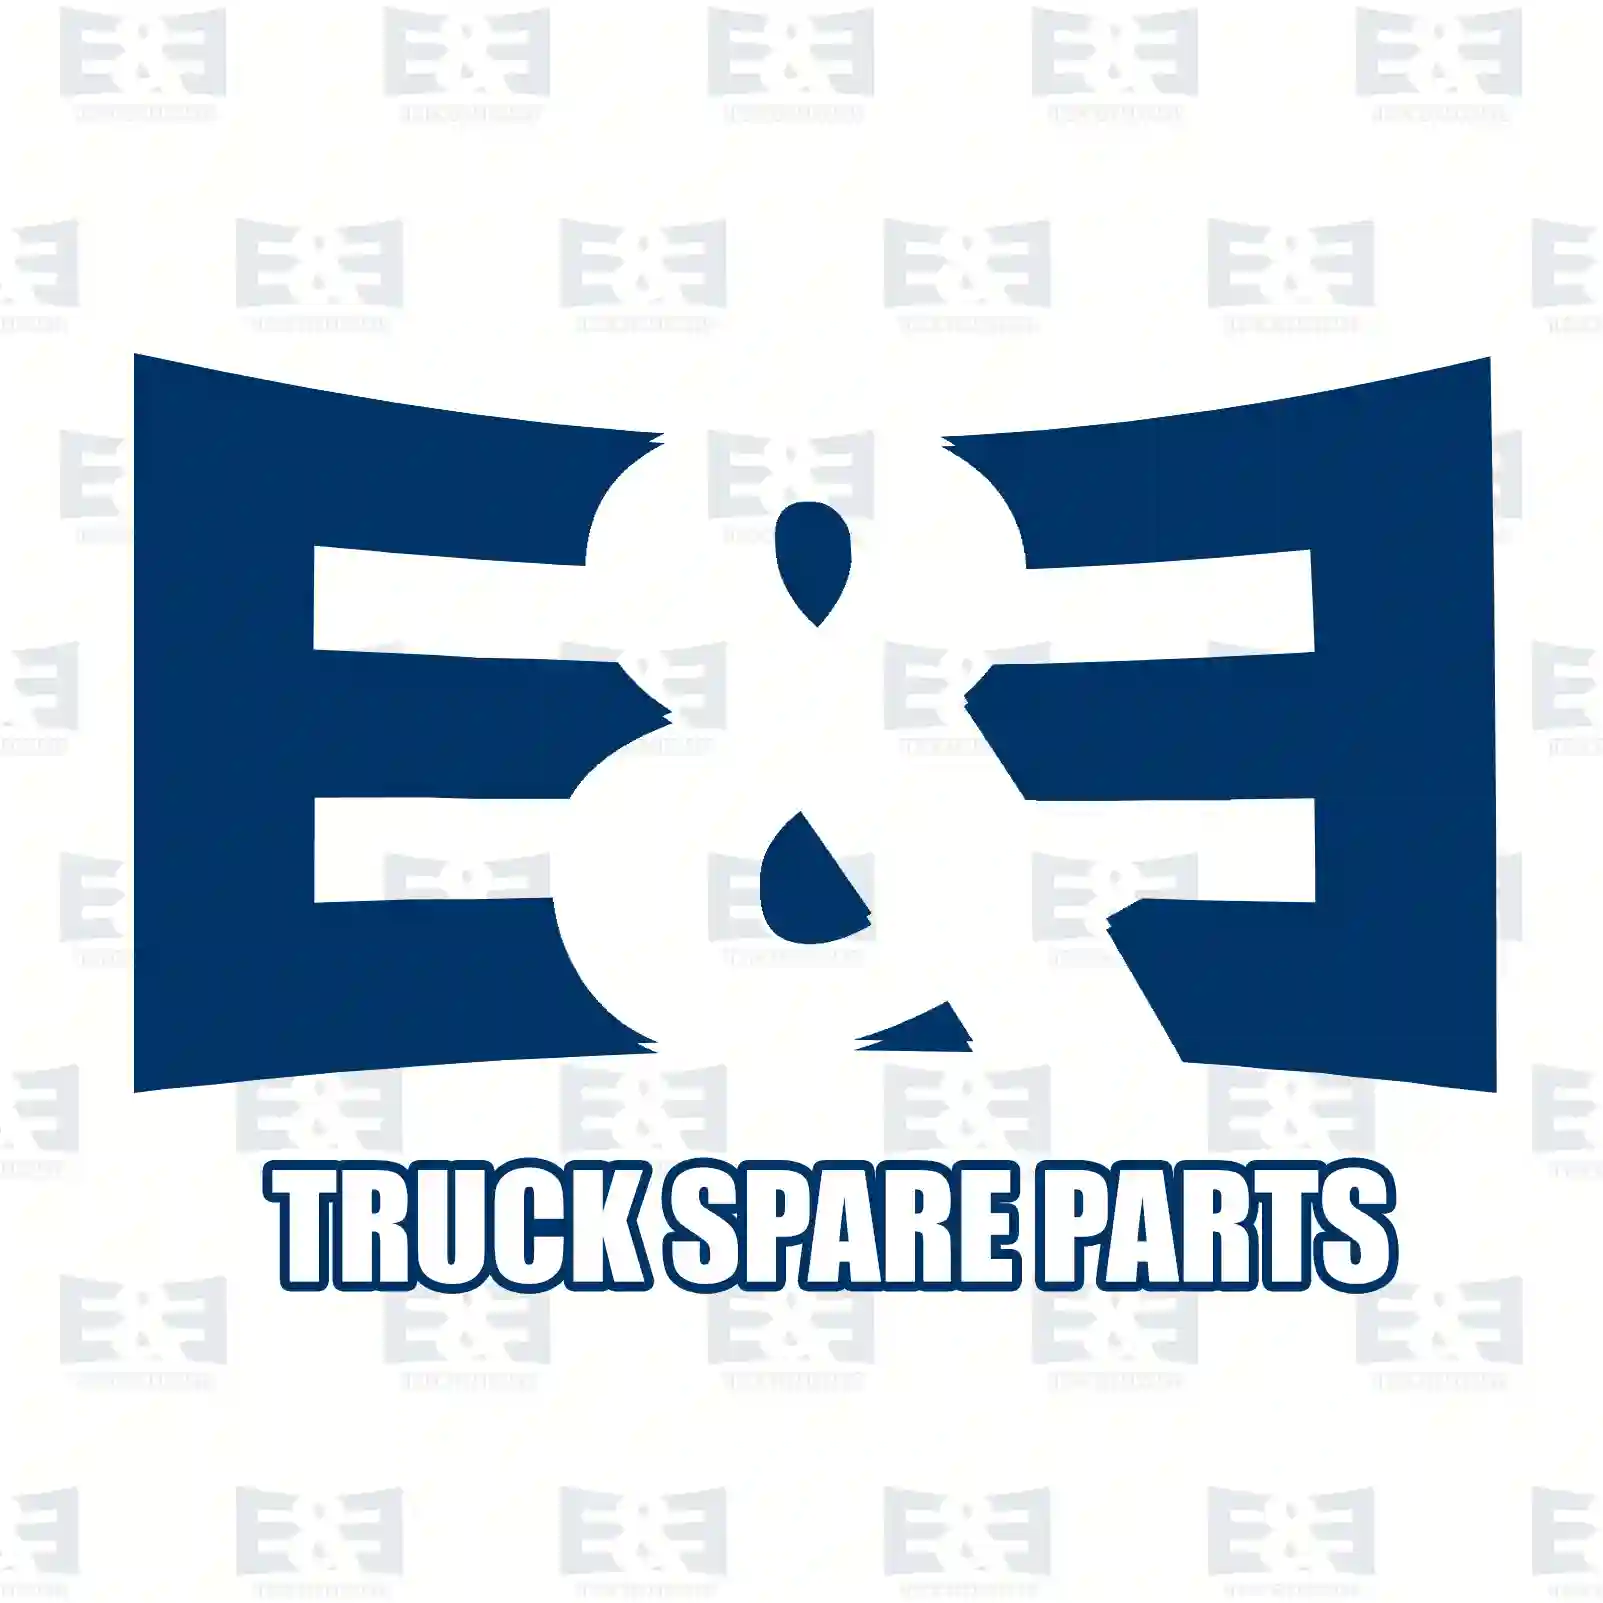  Switching device, ignition system || E&E Truck Spare Parts | Truck Spare Parts, Auotomotive Spare Parts